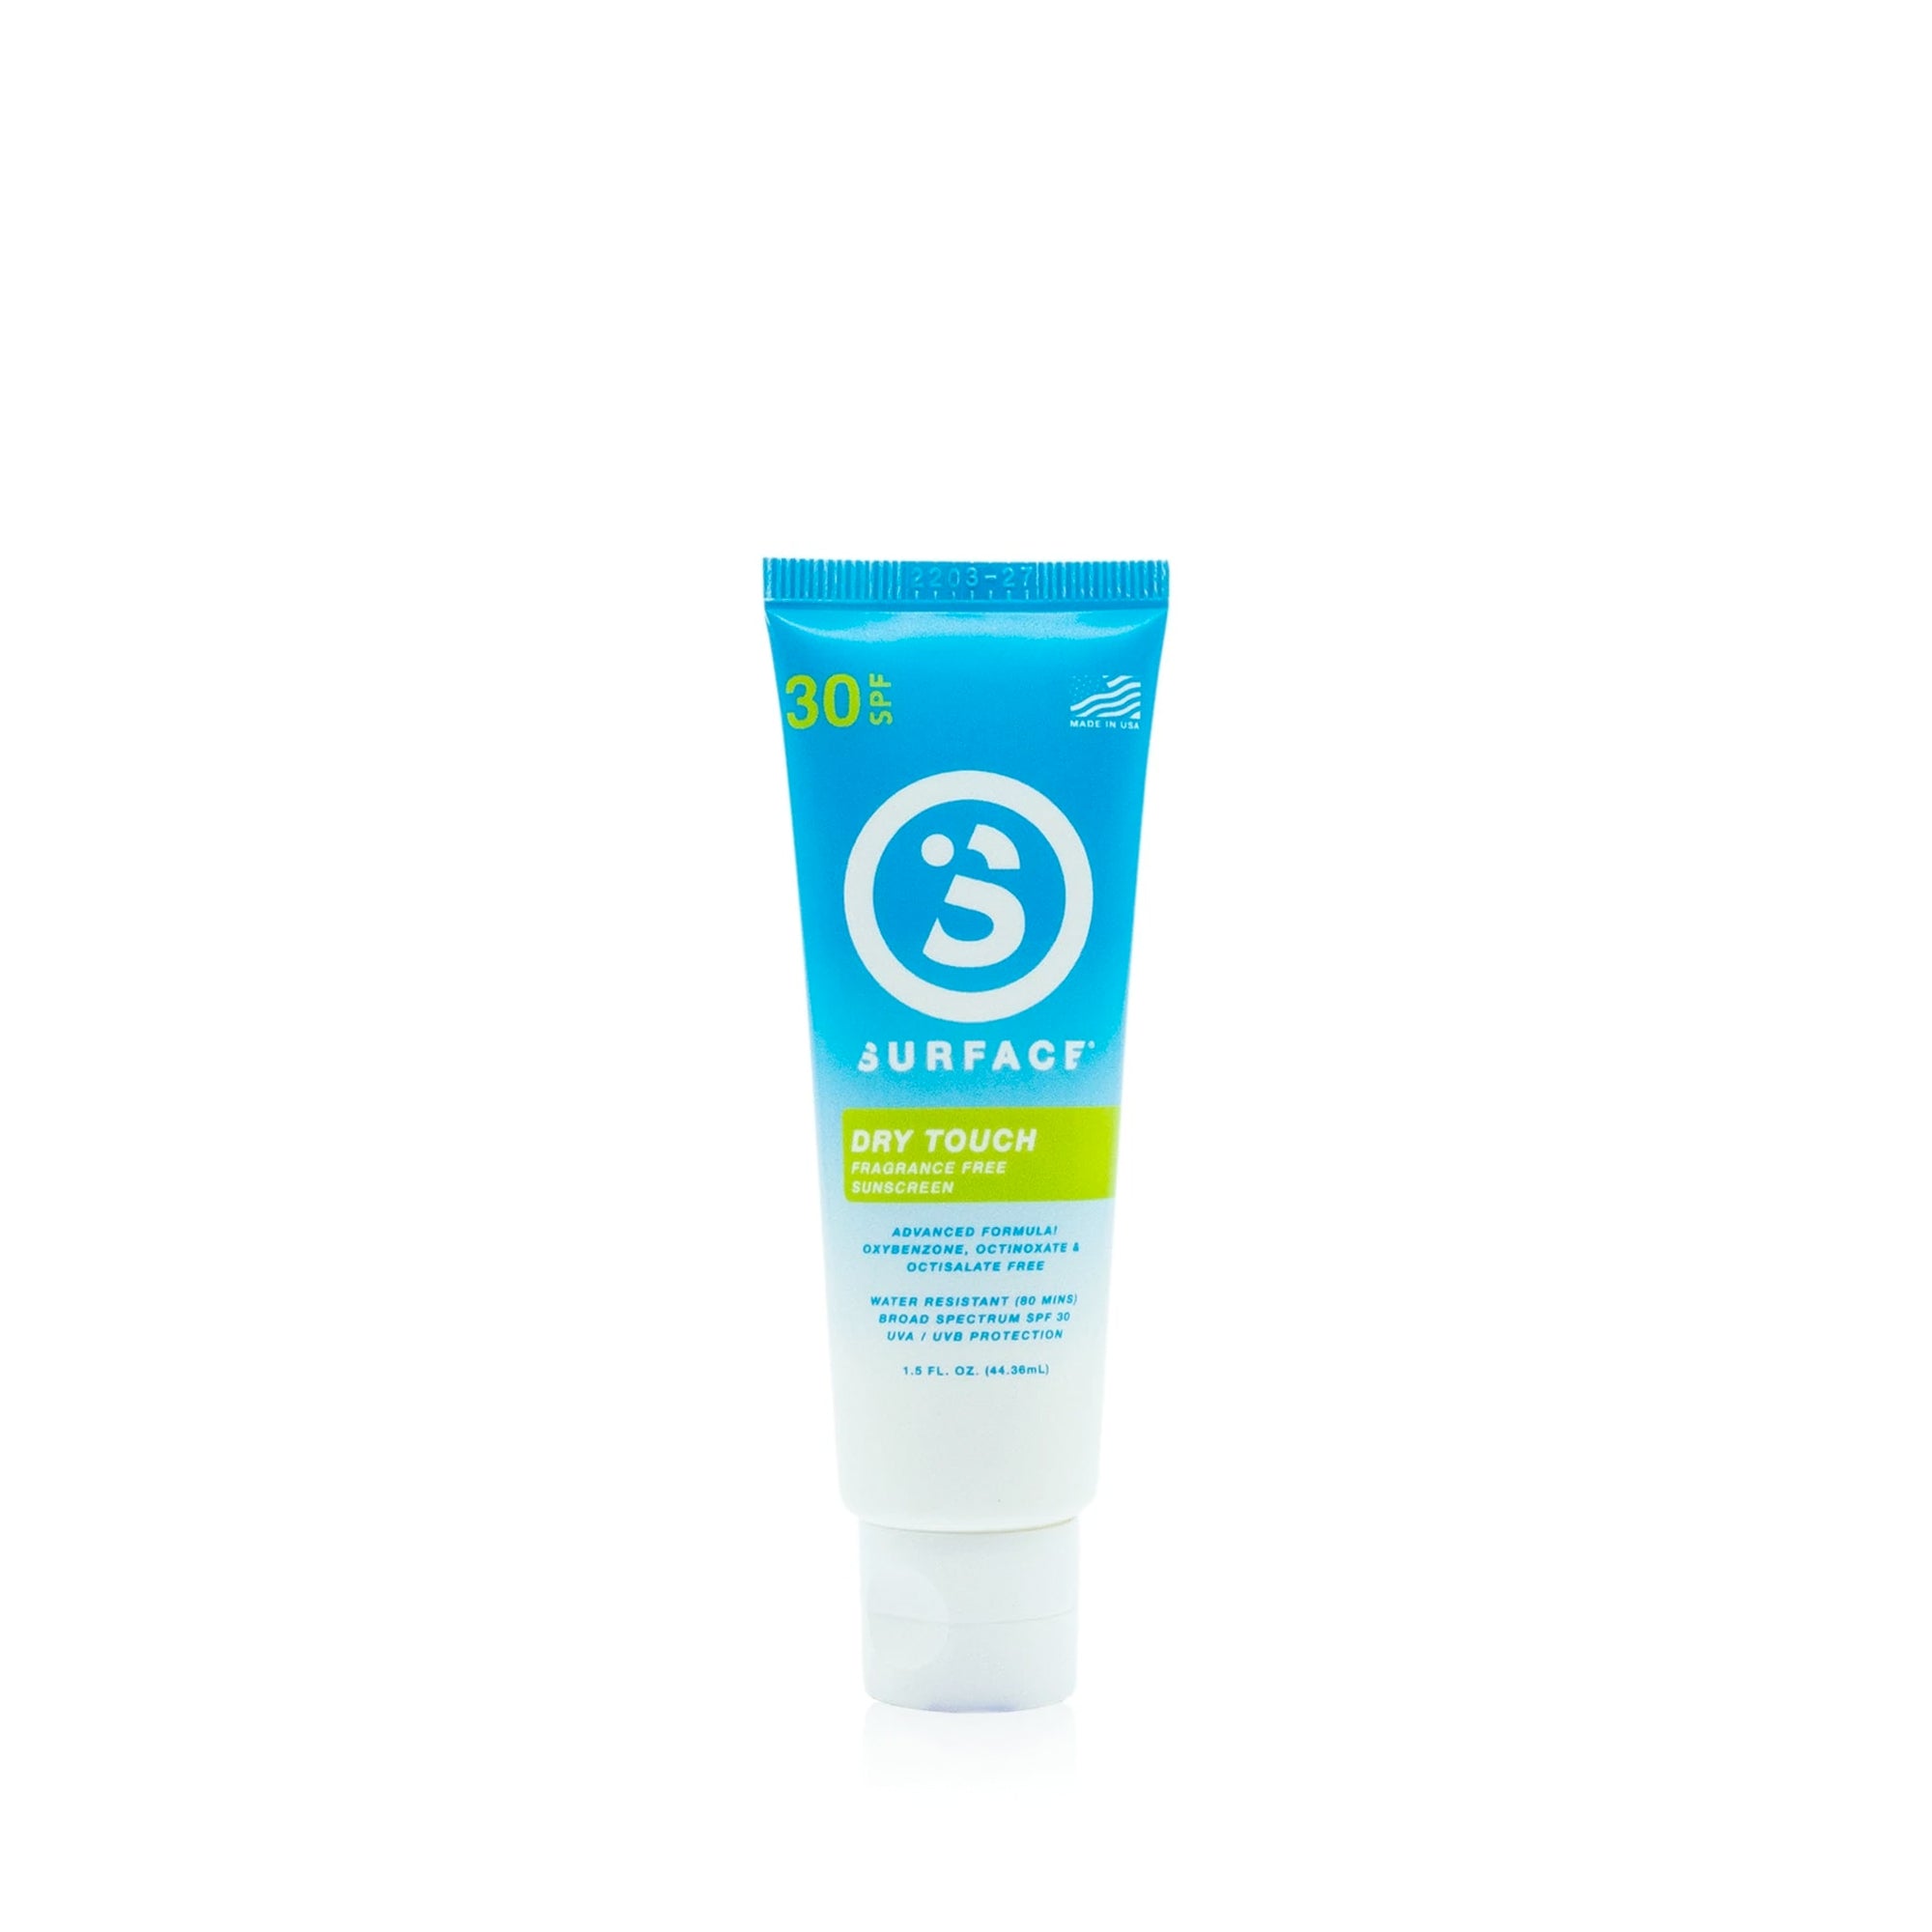 Surface 1.5oz Dry Touch SPF30 Sunscreen Lotion